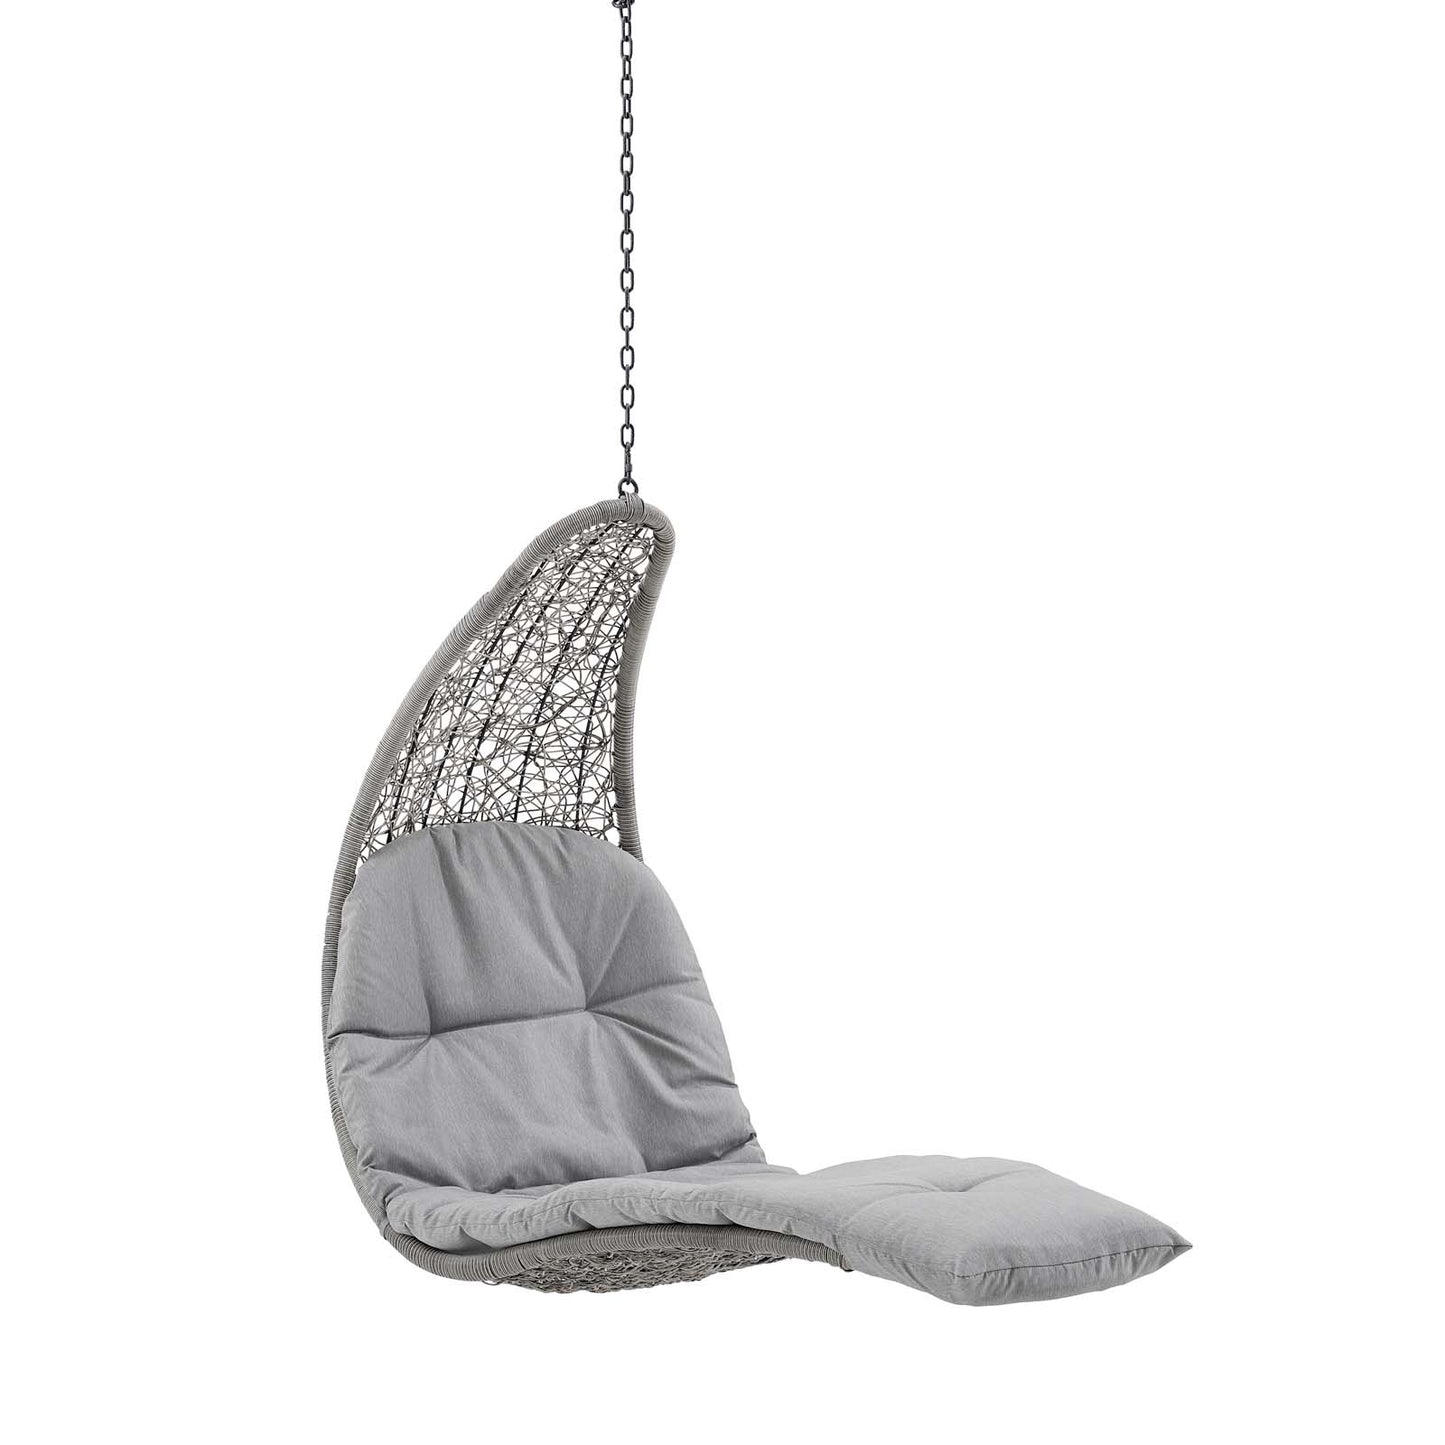 Landscape Hanging Chaise Lounge Outdoor Patio Swing Chair Light Gray Gray EEI-4589-LGR-GRY